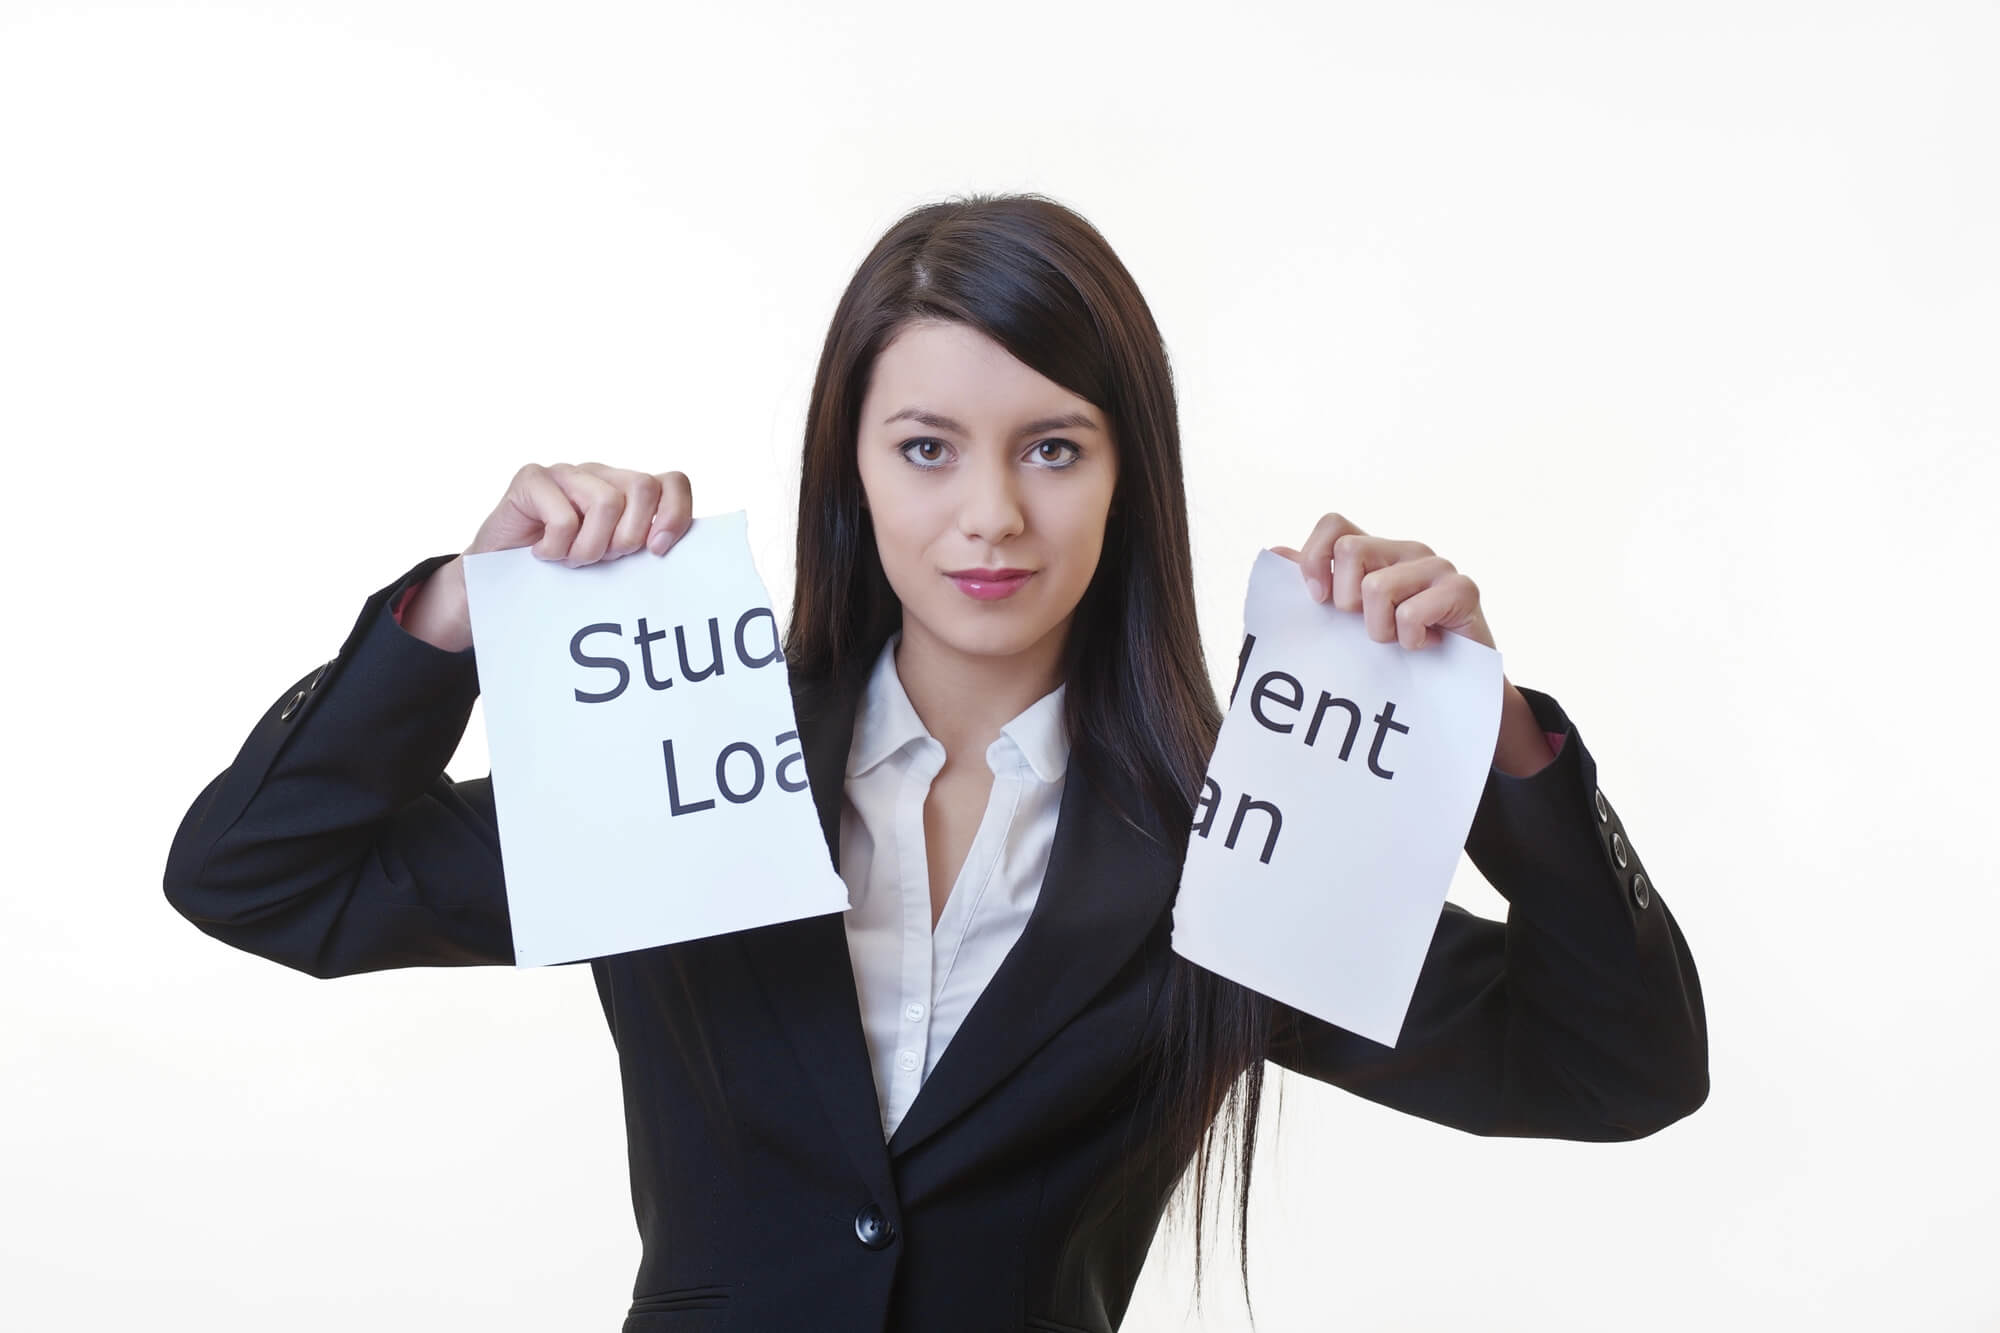 How Do Student Loans Impact Personal Debt Management?